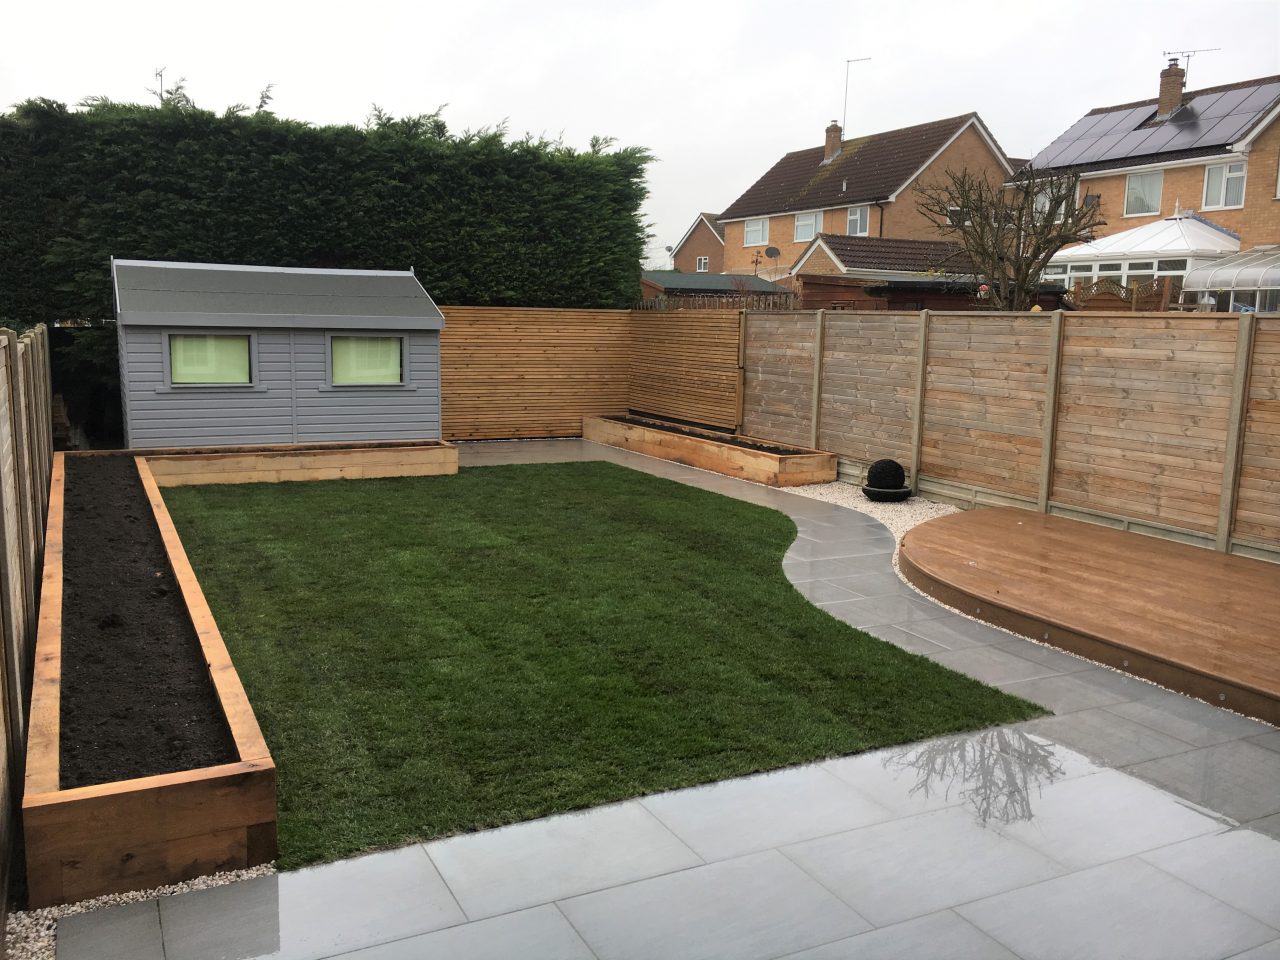 Porcelain Patio and Millboard Decking - Landscaping Cambridge